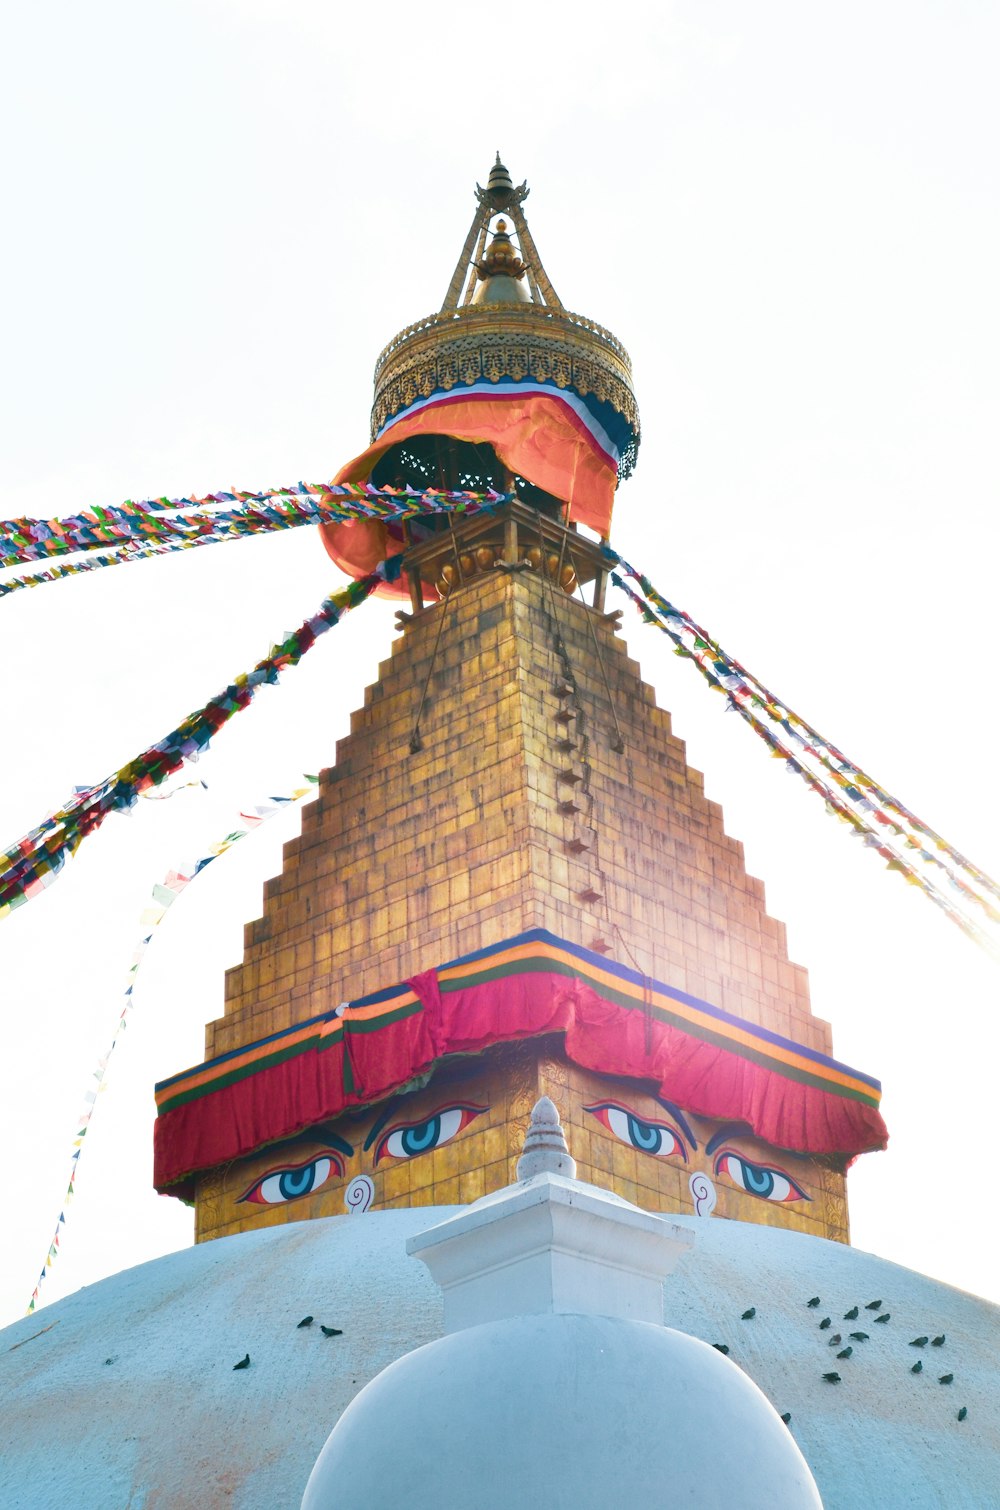 Boudha Pictures  Download Free Images on Unsplash